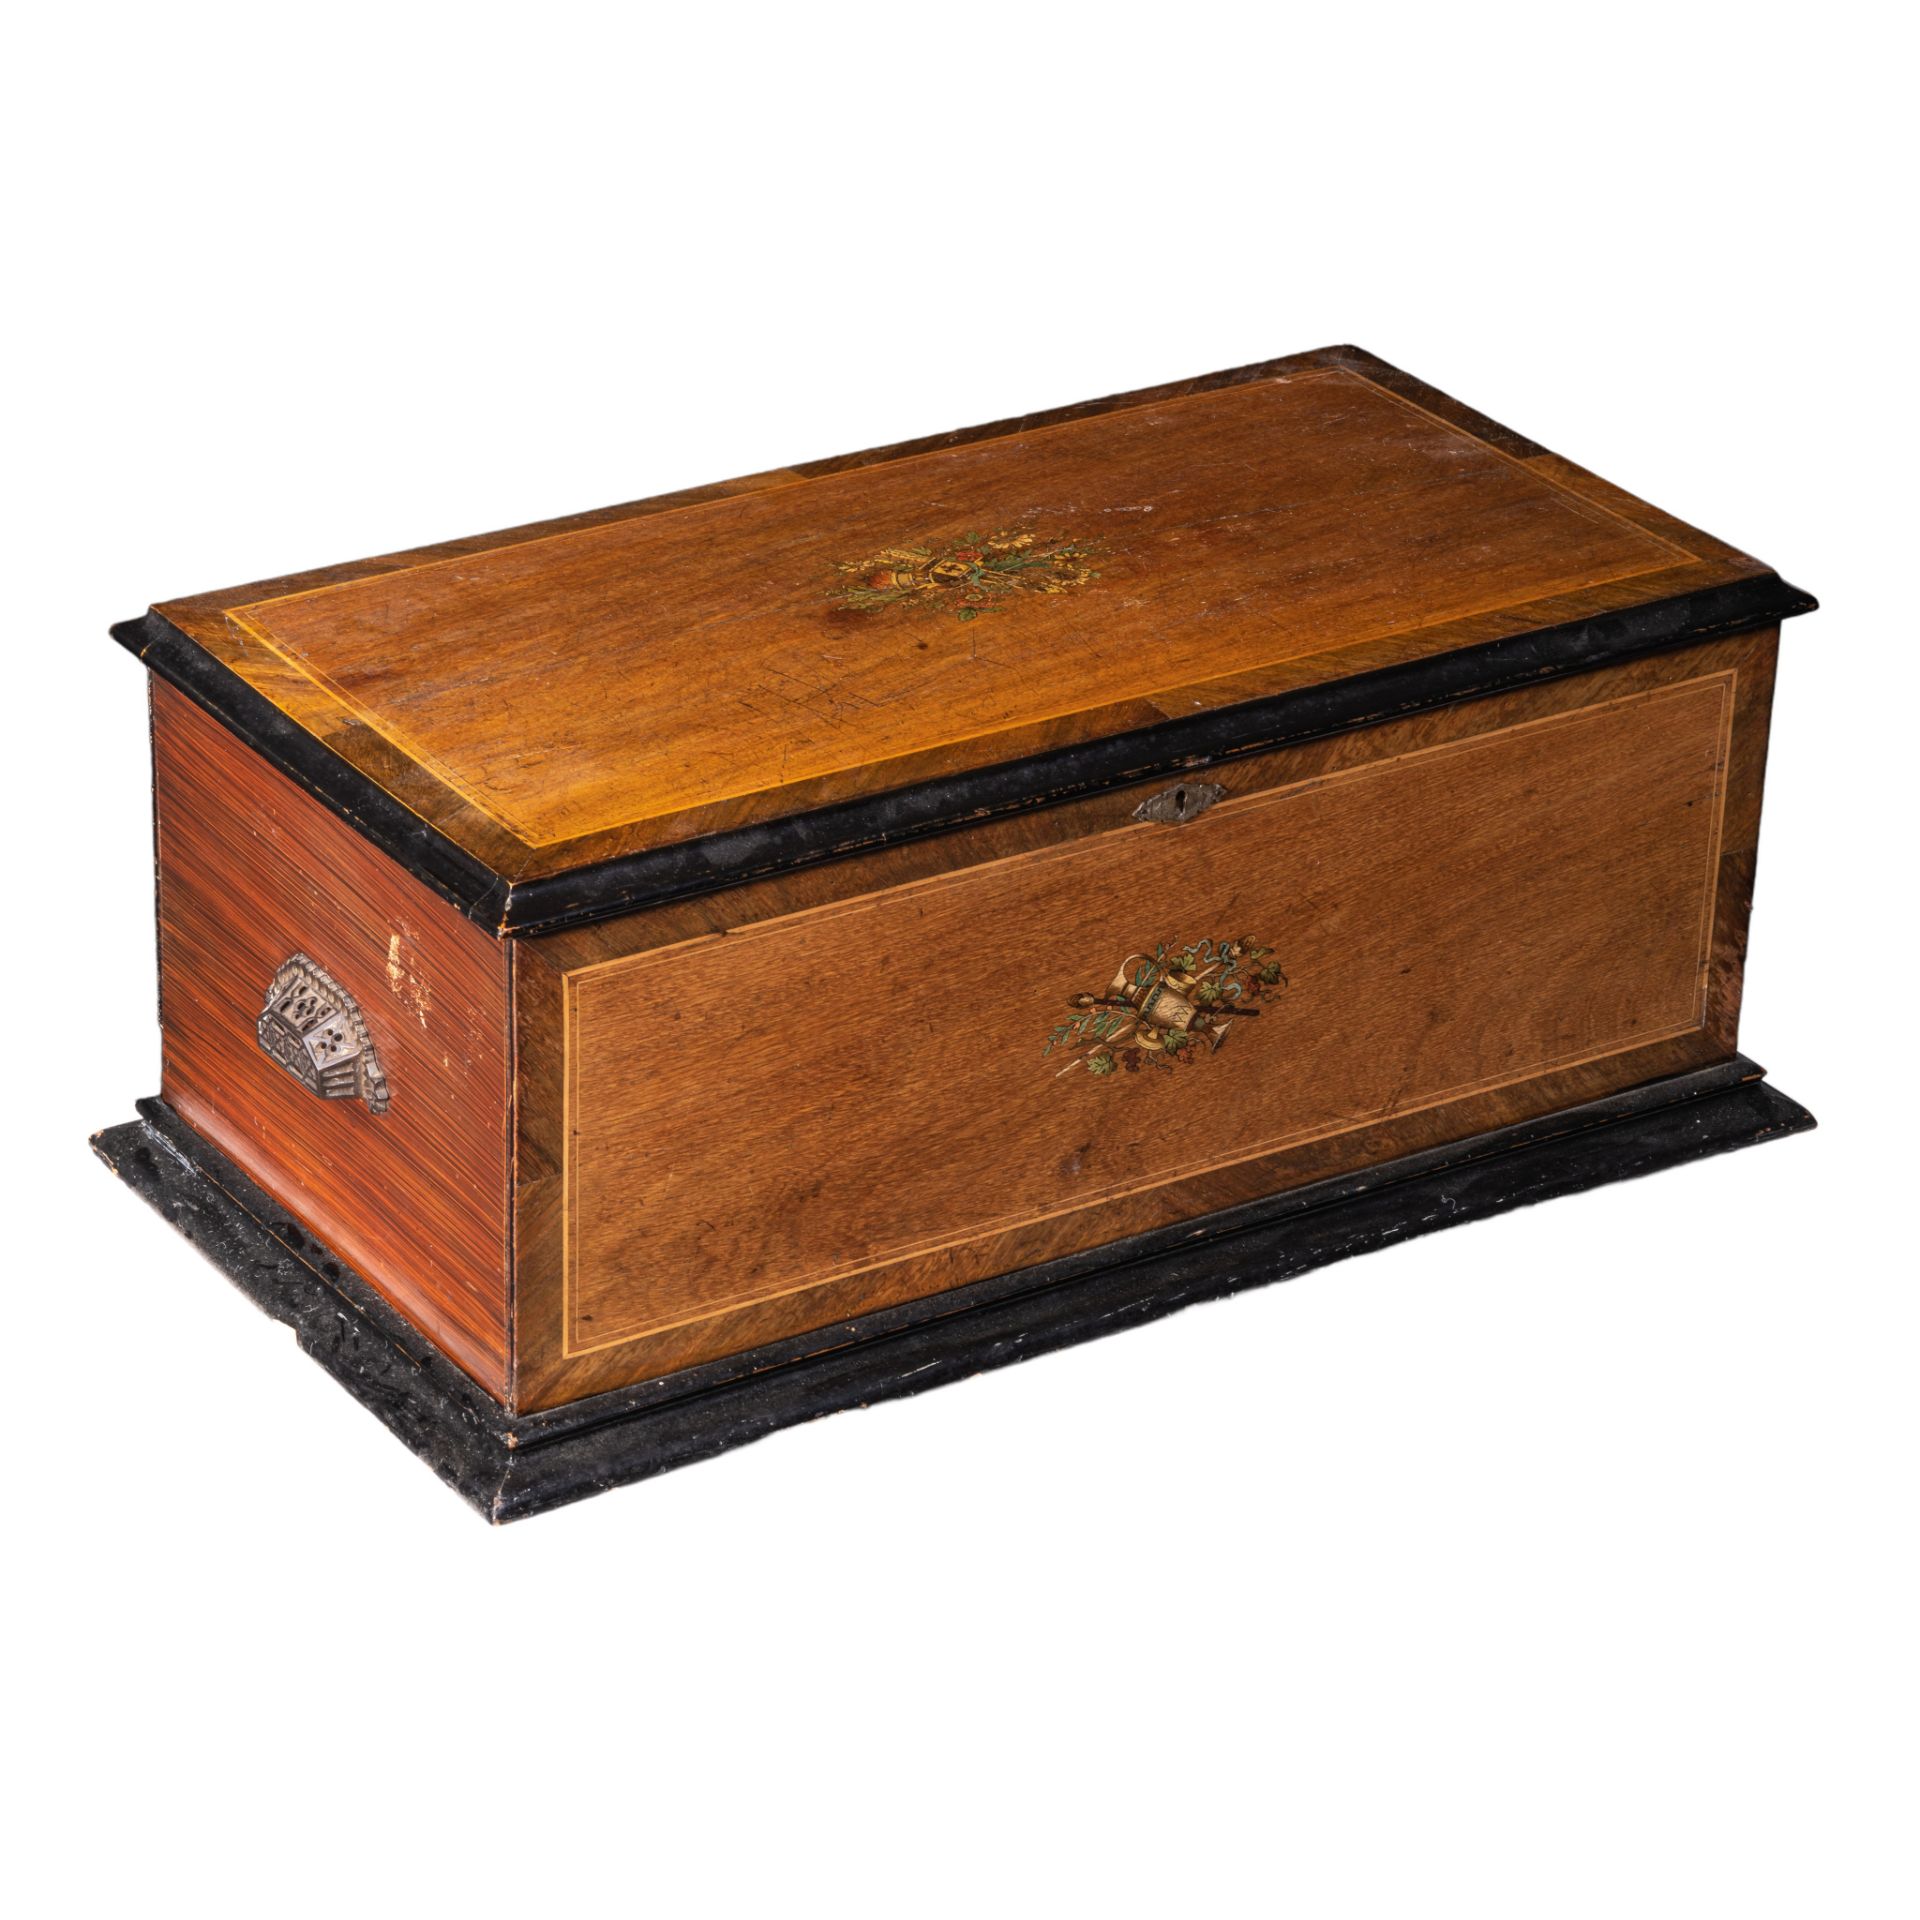 A Victorian mahogany and rosewood veneered cylinder musical box, 1920s, H 28,5 - W 70- D 37 cm - Image 10 of 10